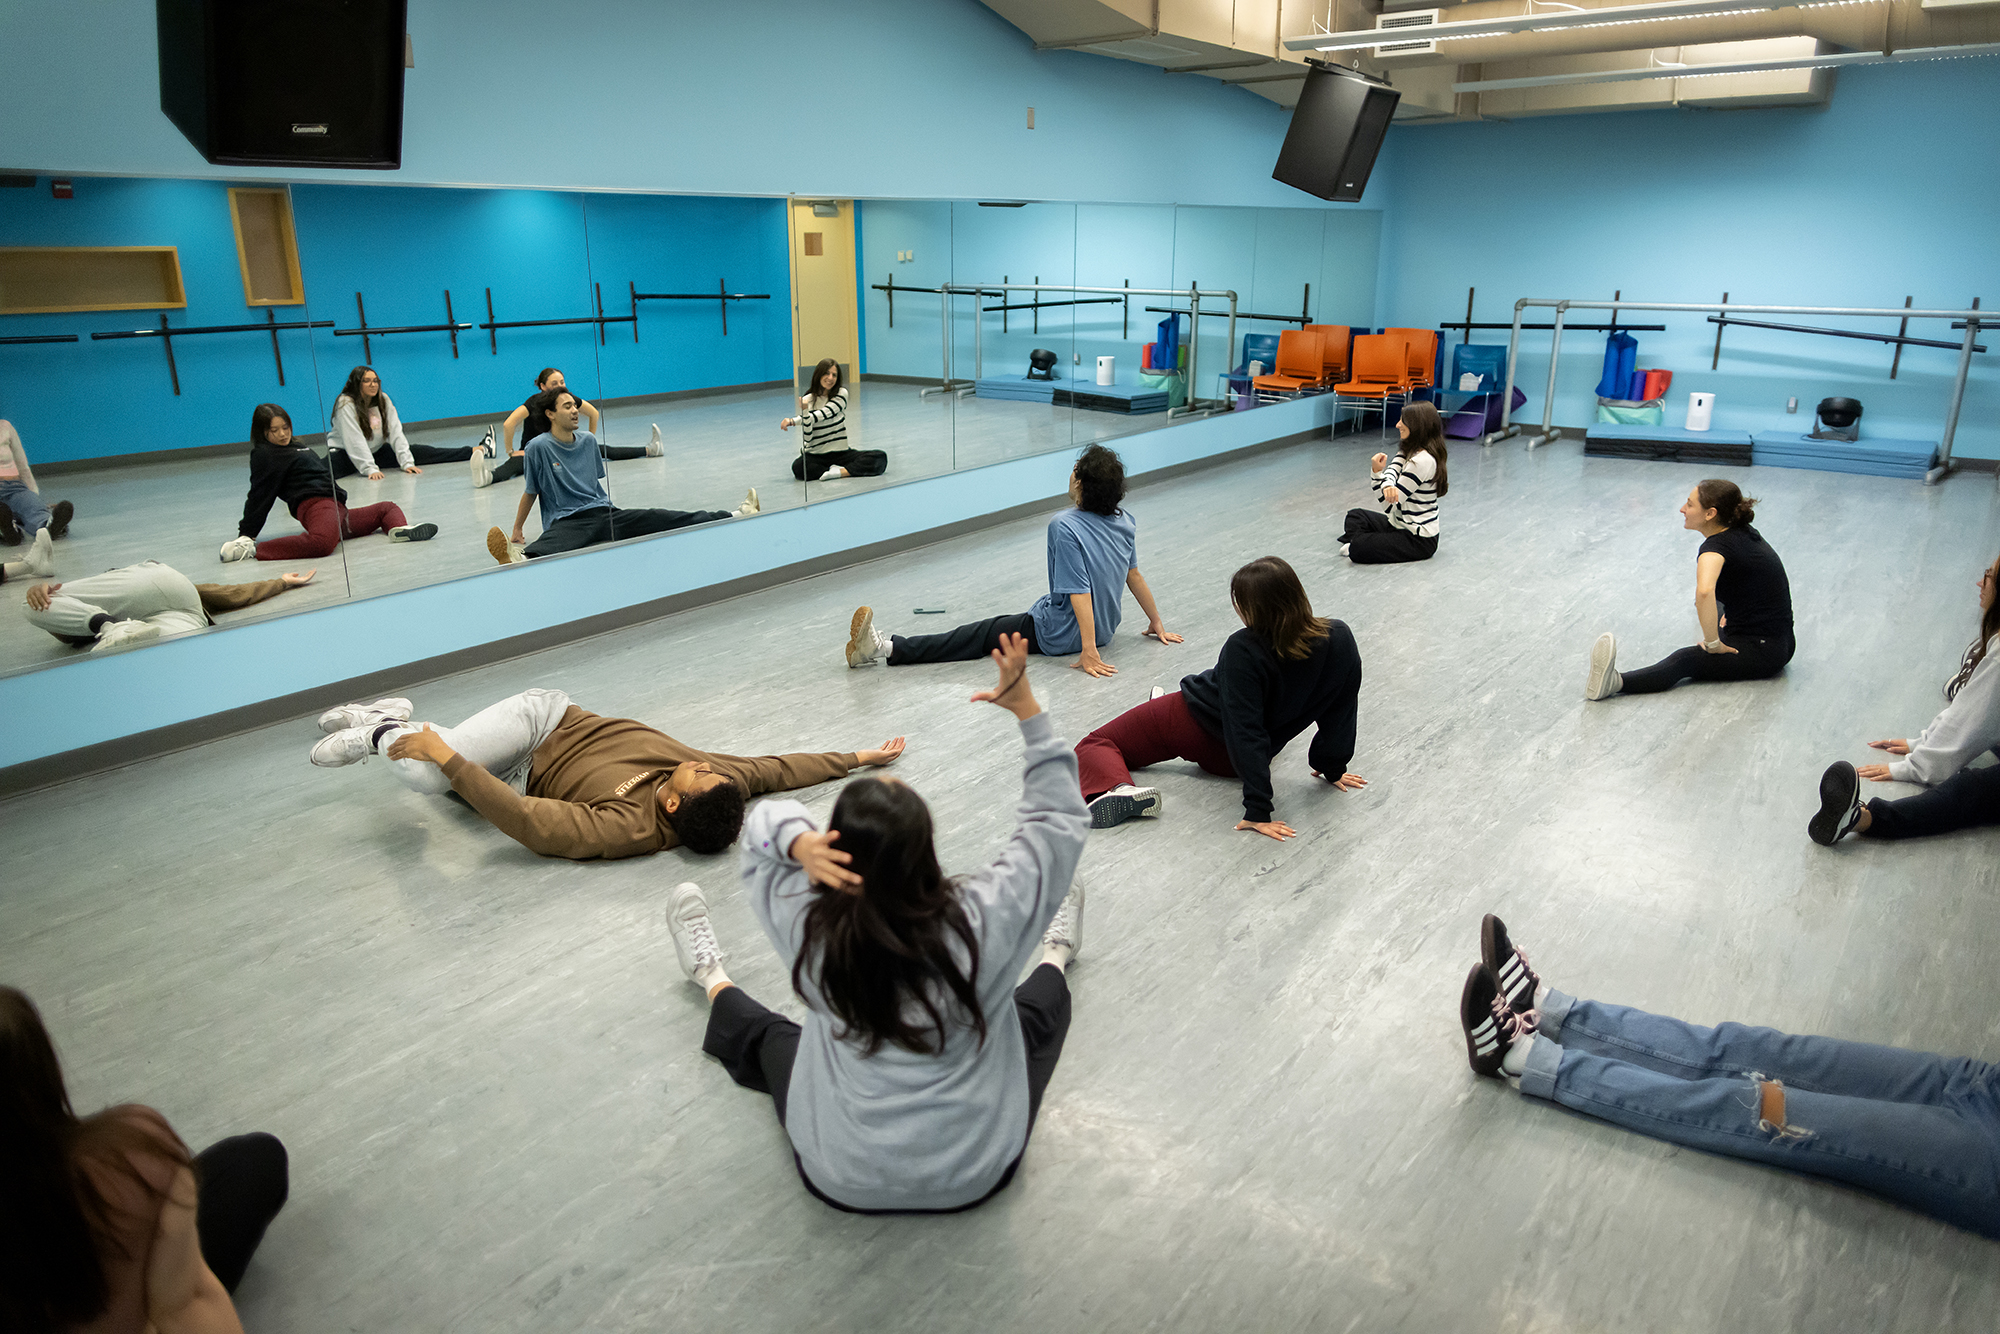 Members of one of Penn’s dance troupes stretching in a studio.